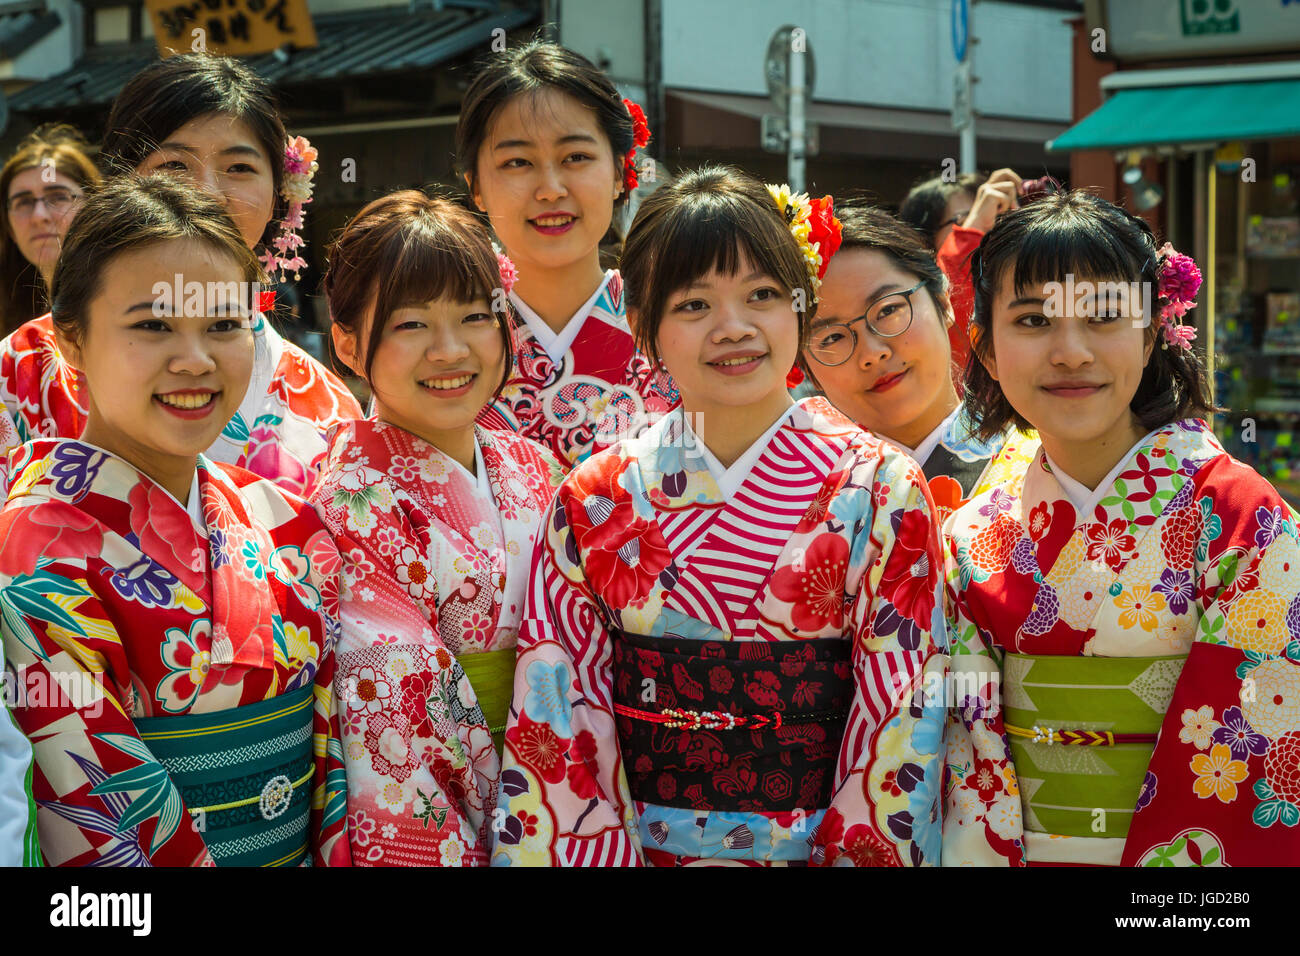 young girls from tokyo japan